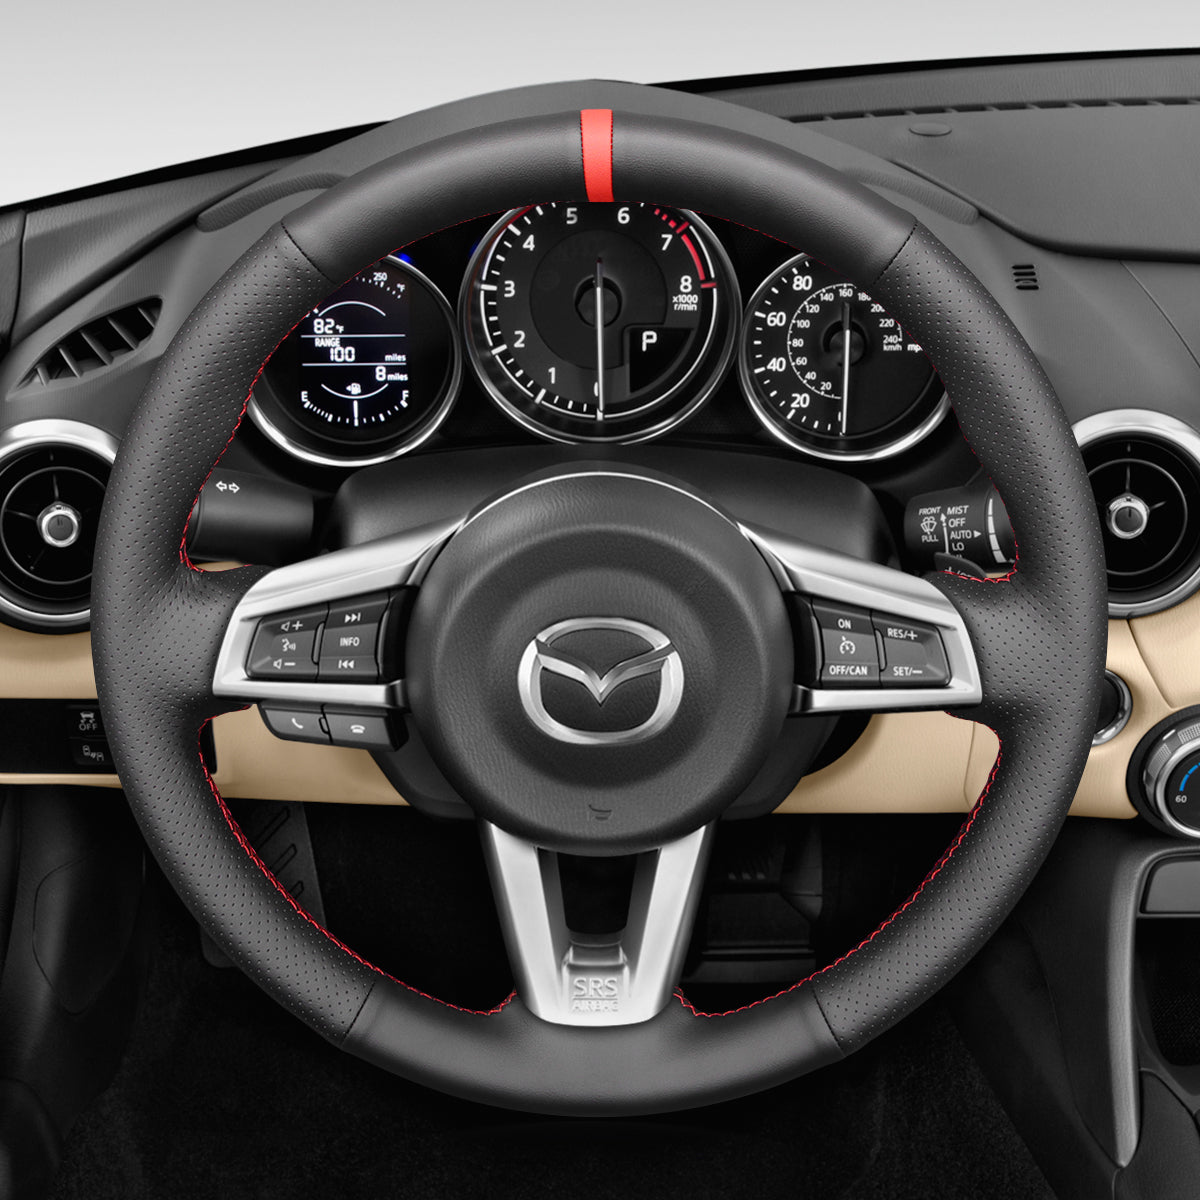 MEWANT Leather Suede Carbon Fiber Car Steering Wheel Cover for Mazda MX-5 2016-2019